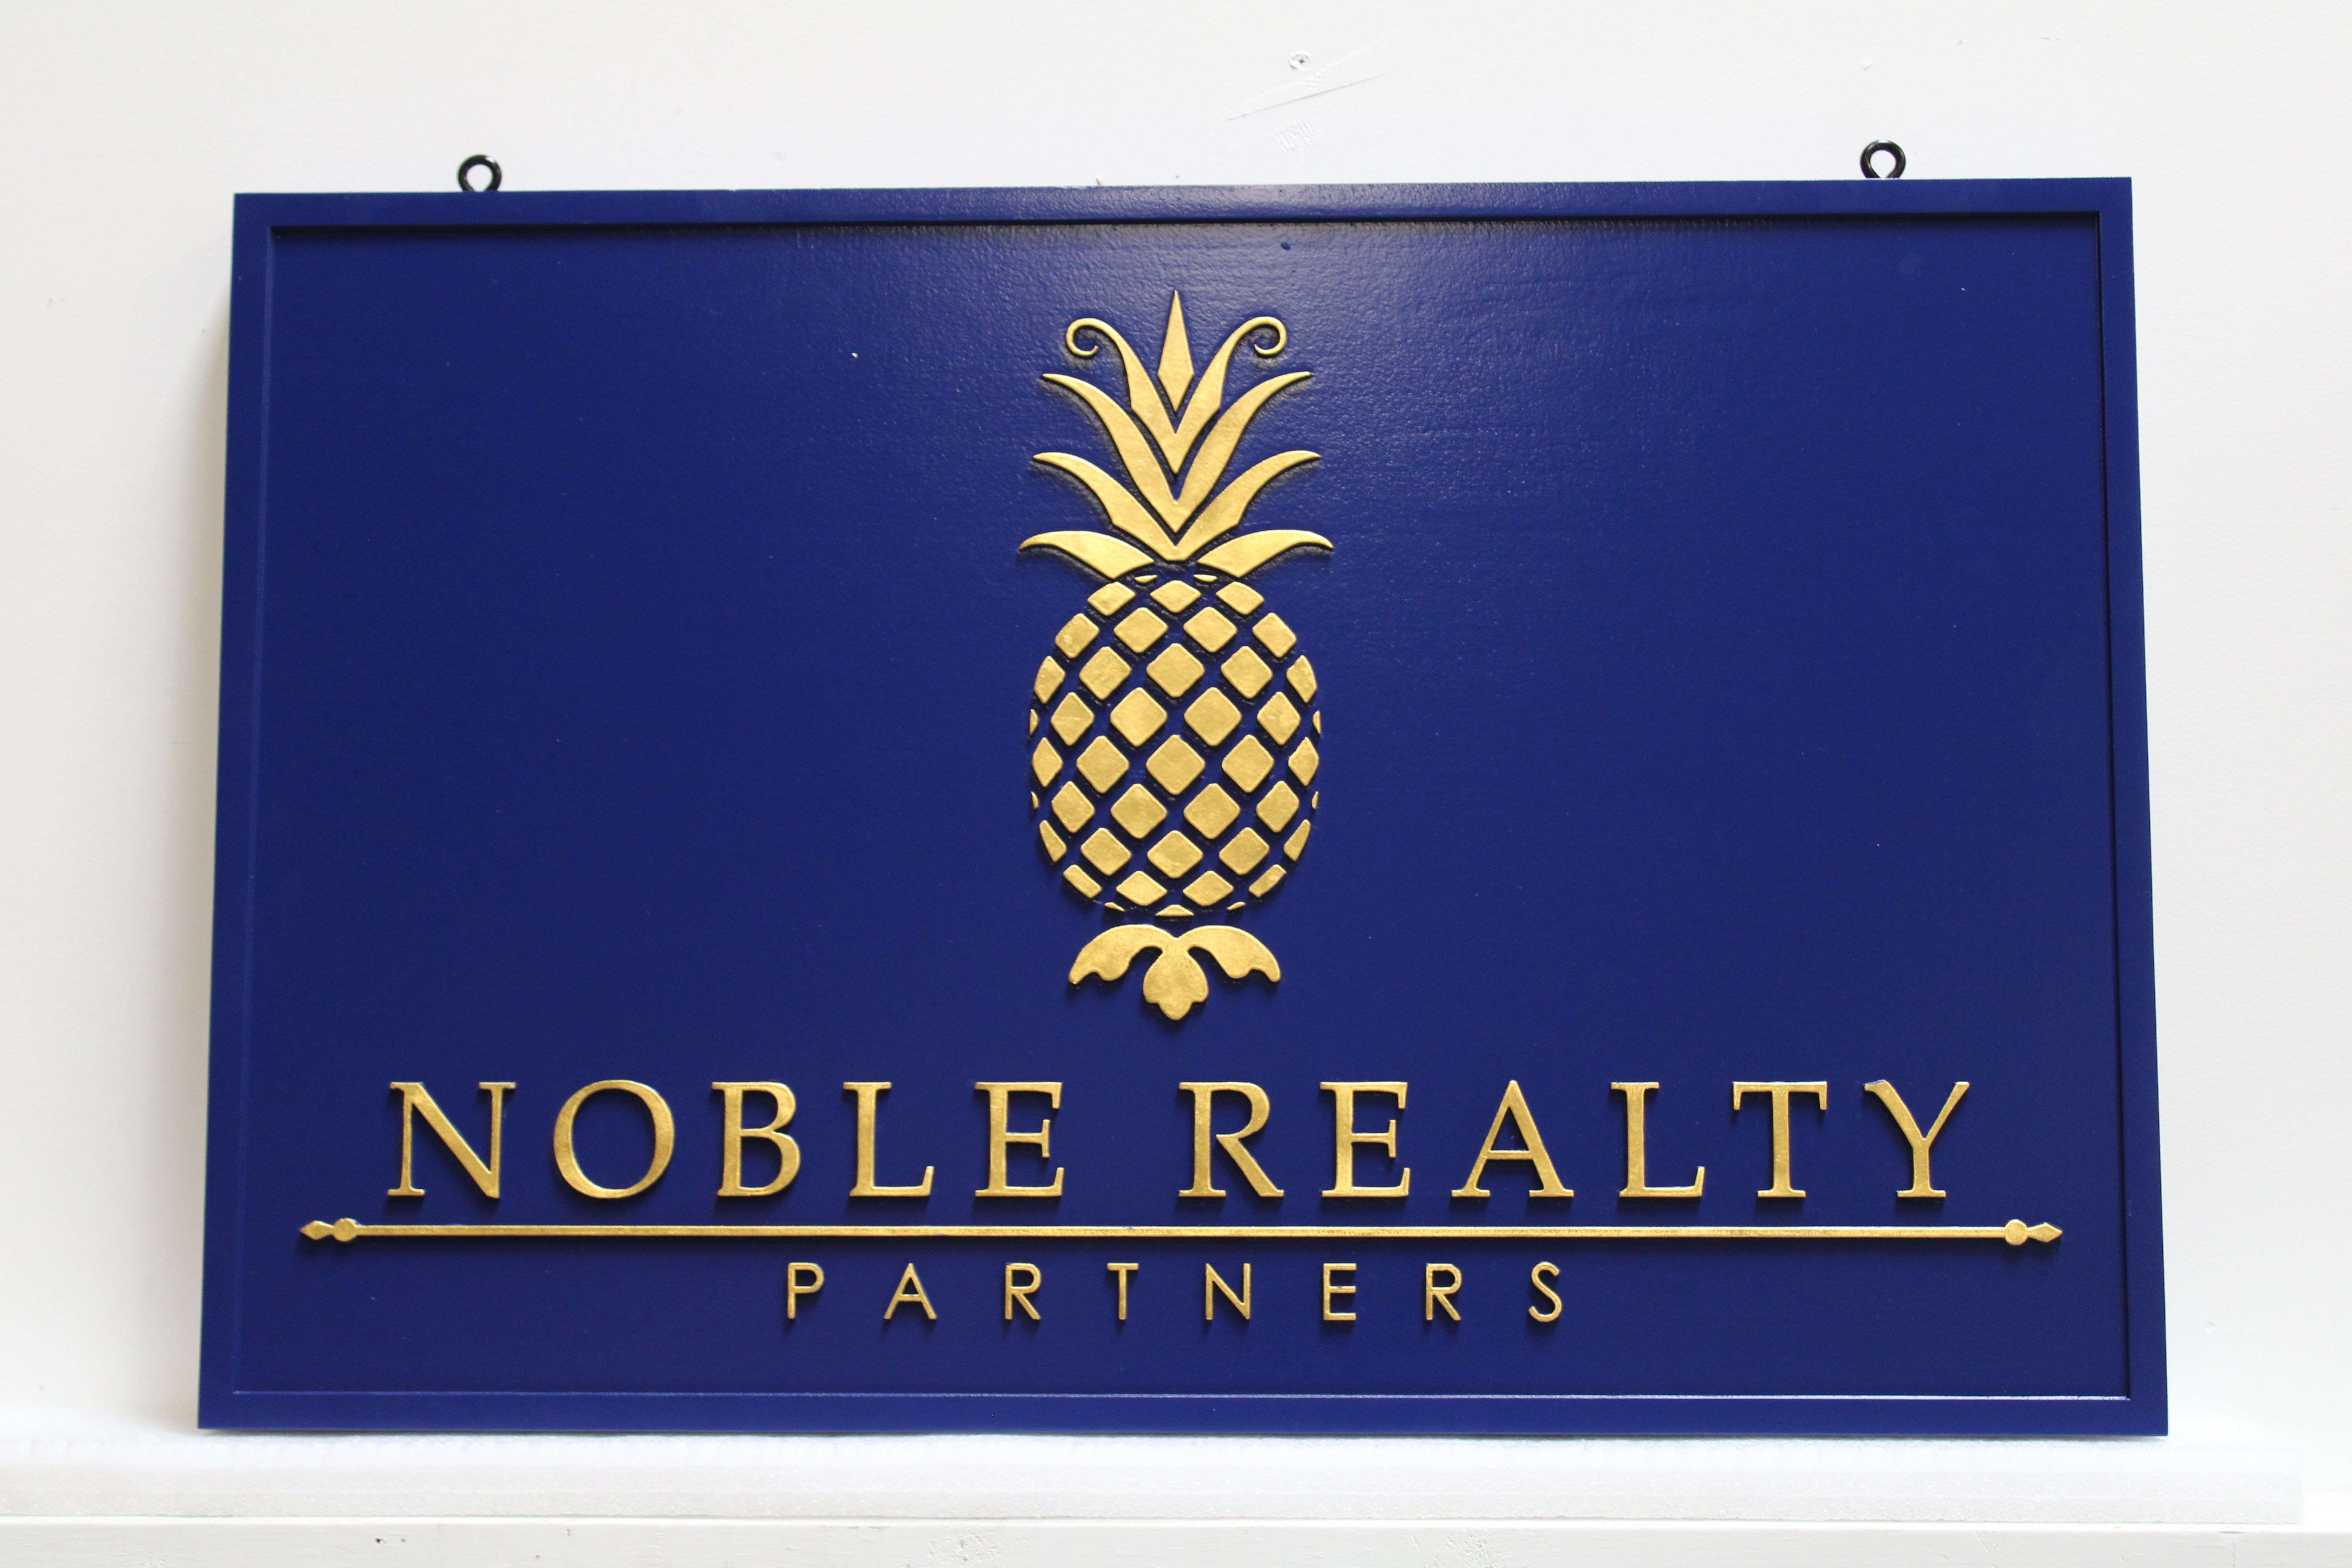 C12288 - Carved 24K Gold-Leaf Gilded  Raised Text and Pineapple  Sign for the Noble Realty Partners  